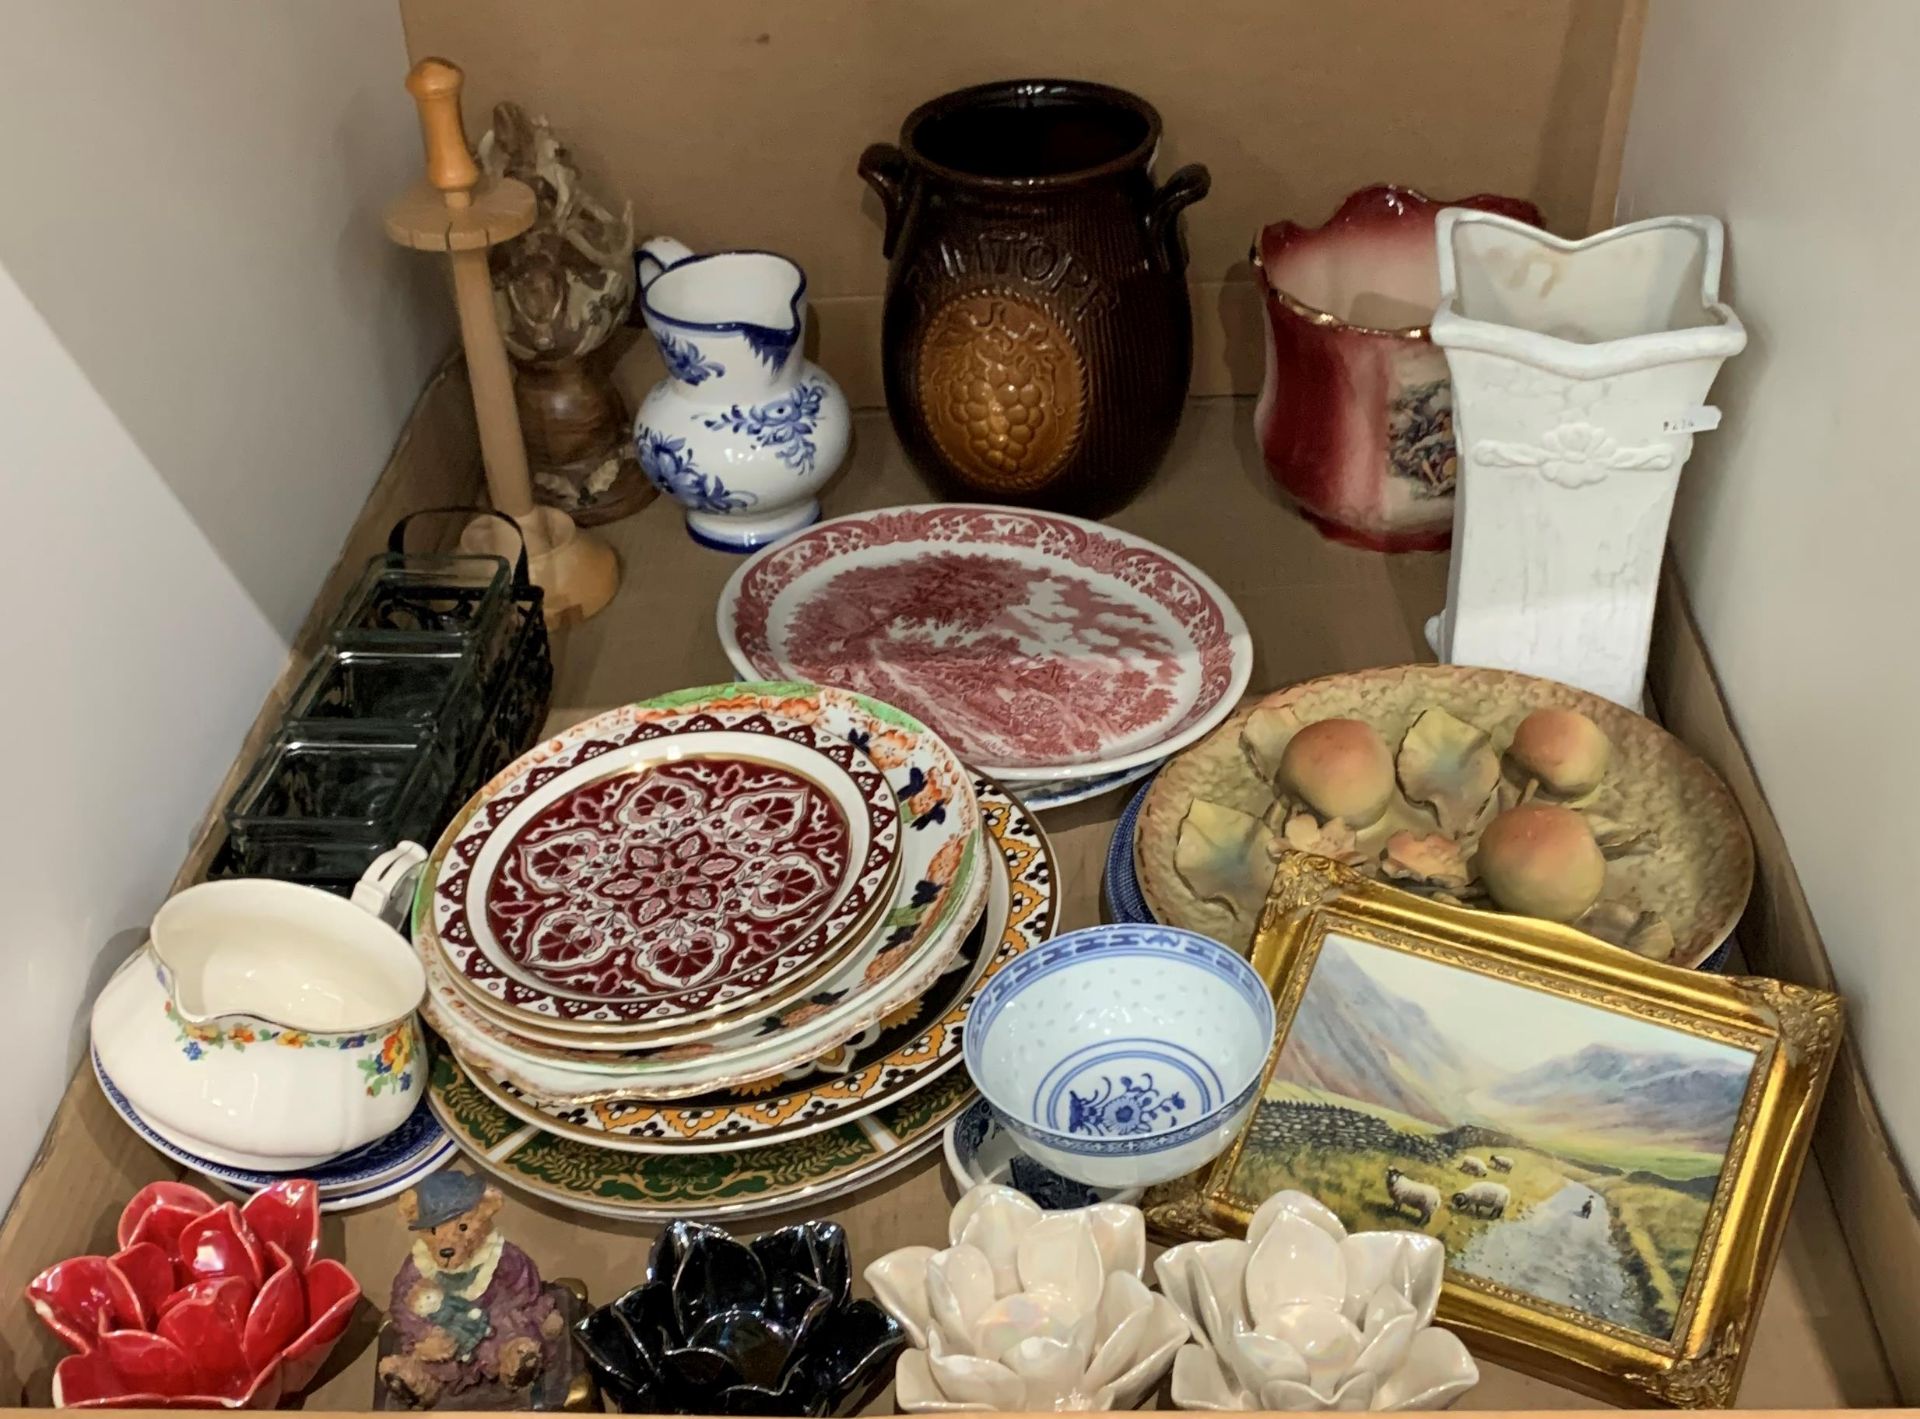 Contents to tray - assorted porcelain/pottery plates, lotus dishes, jugs,